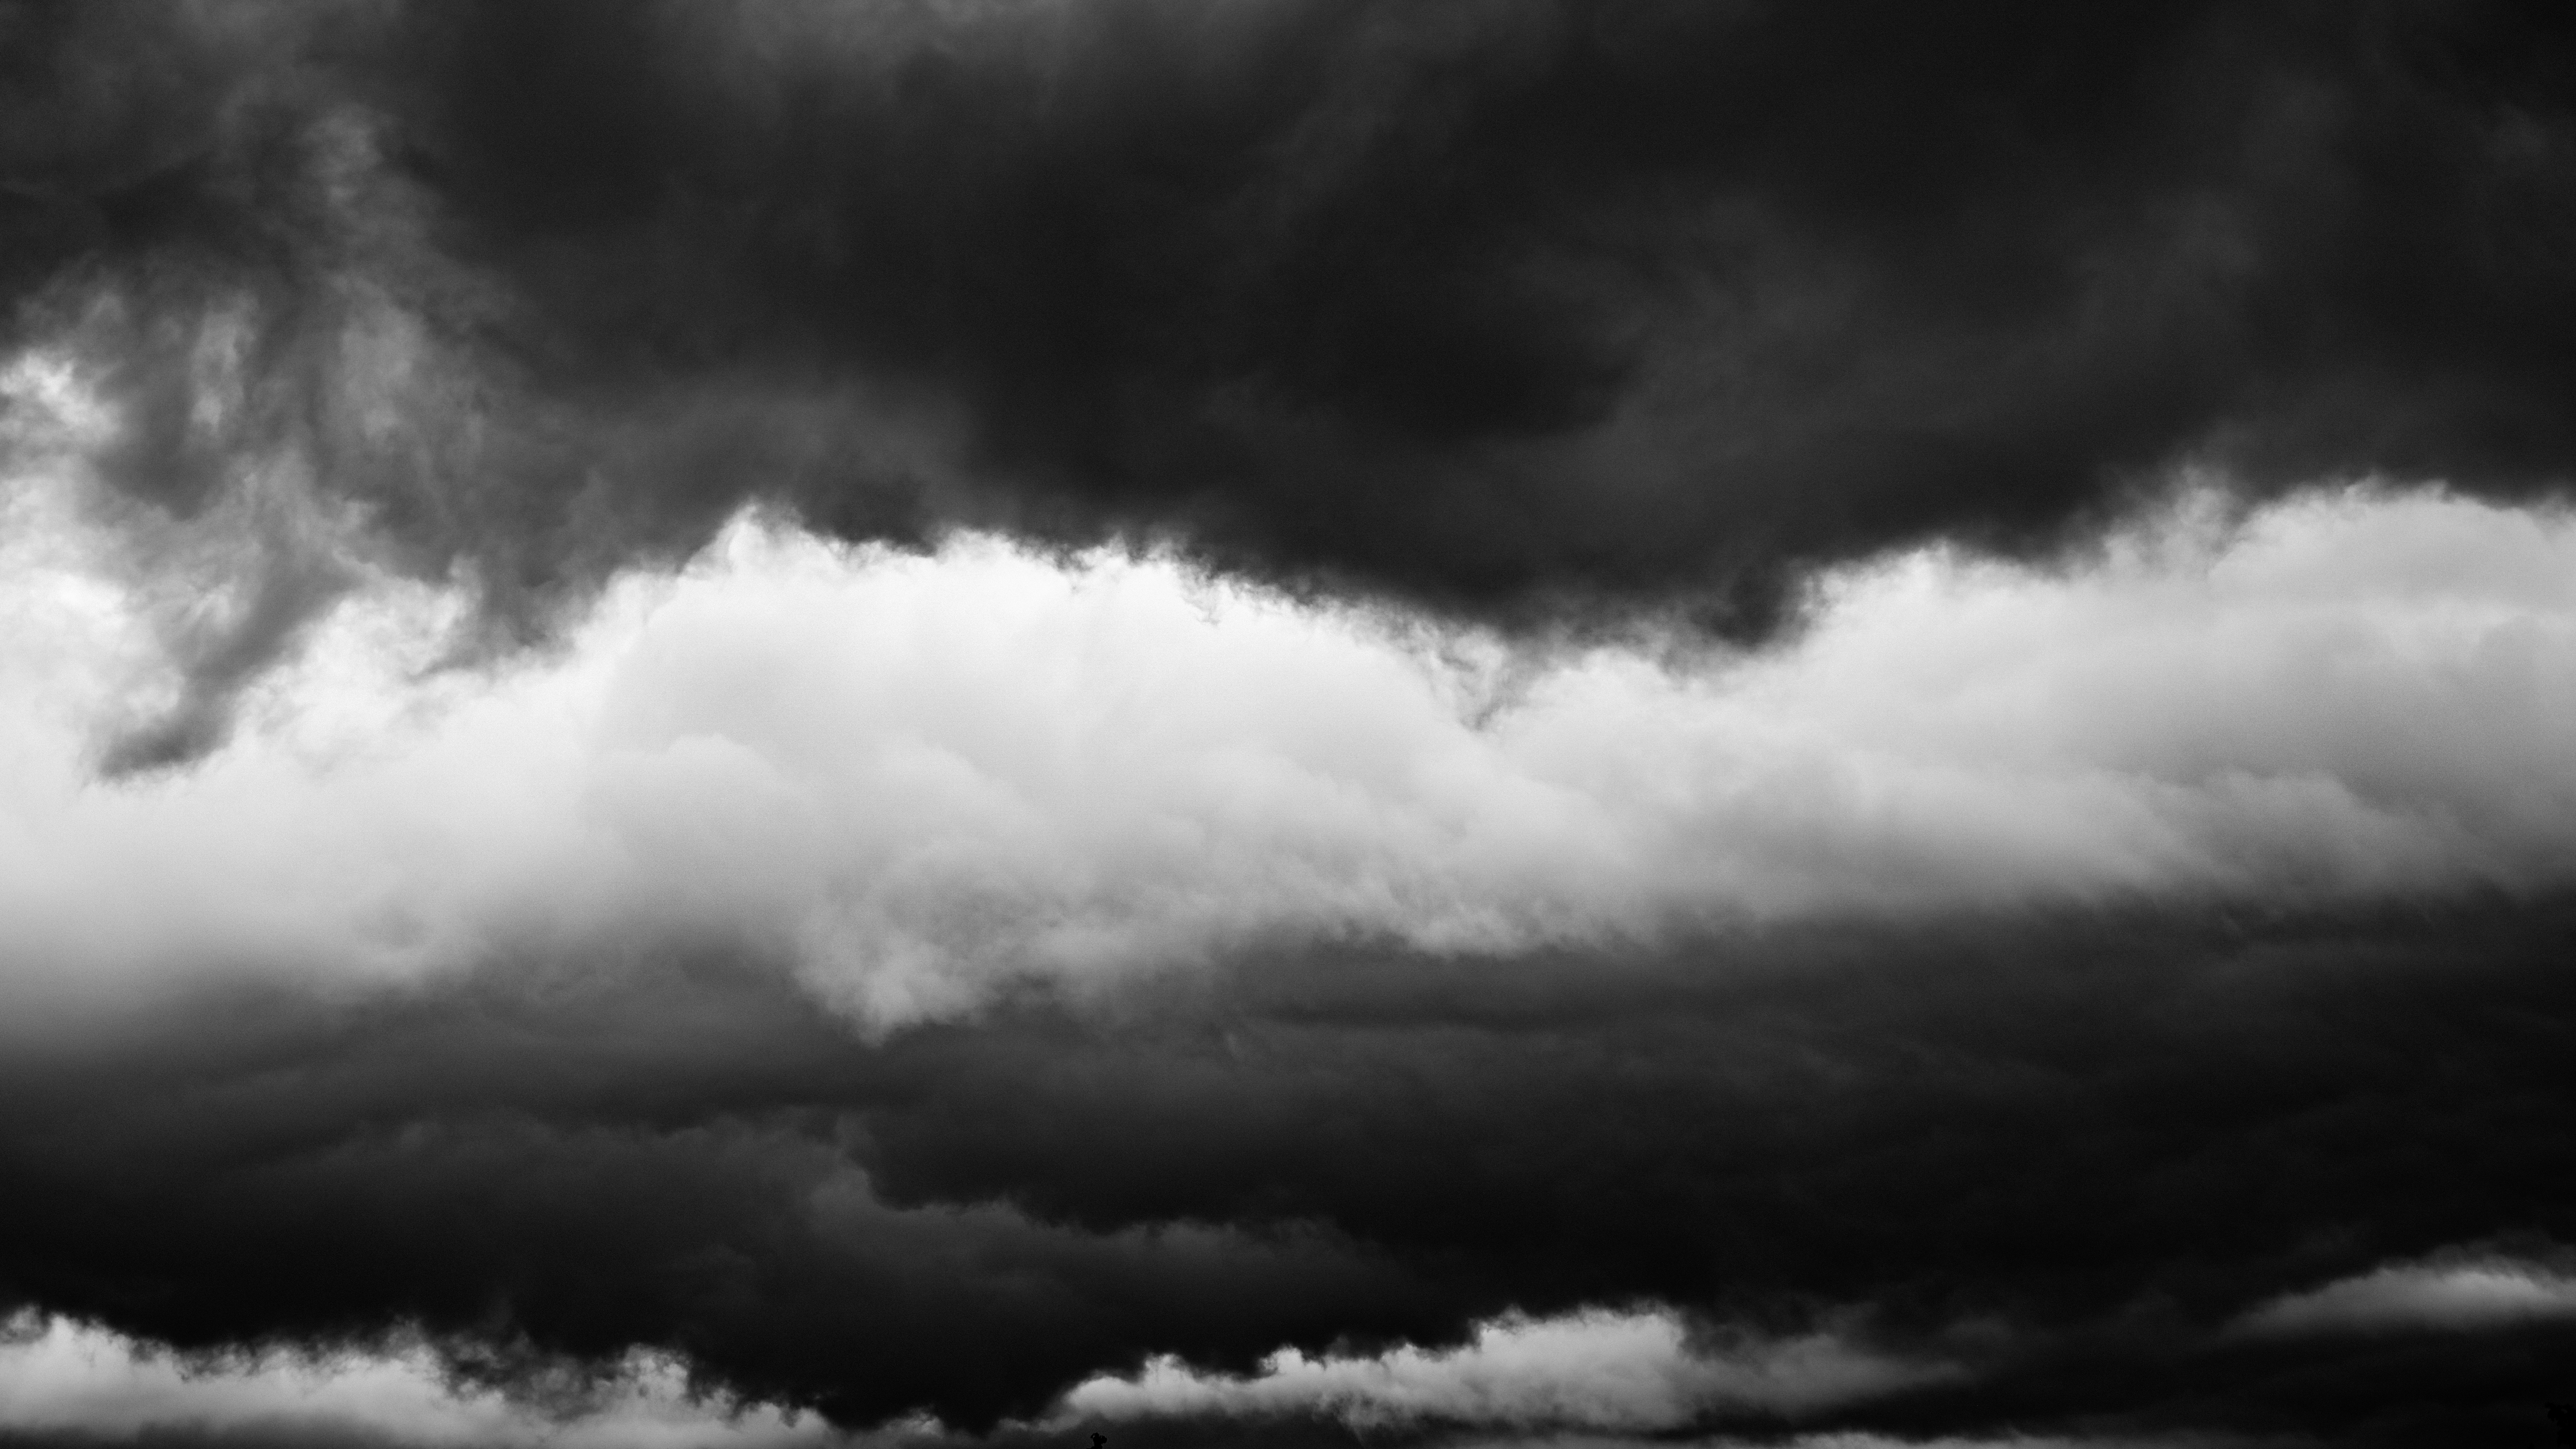 Clouds Nature Photography Monochrome Thunder Storm 5749x3234